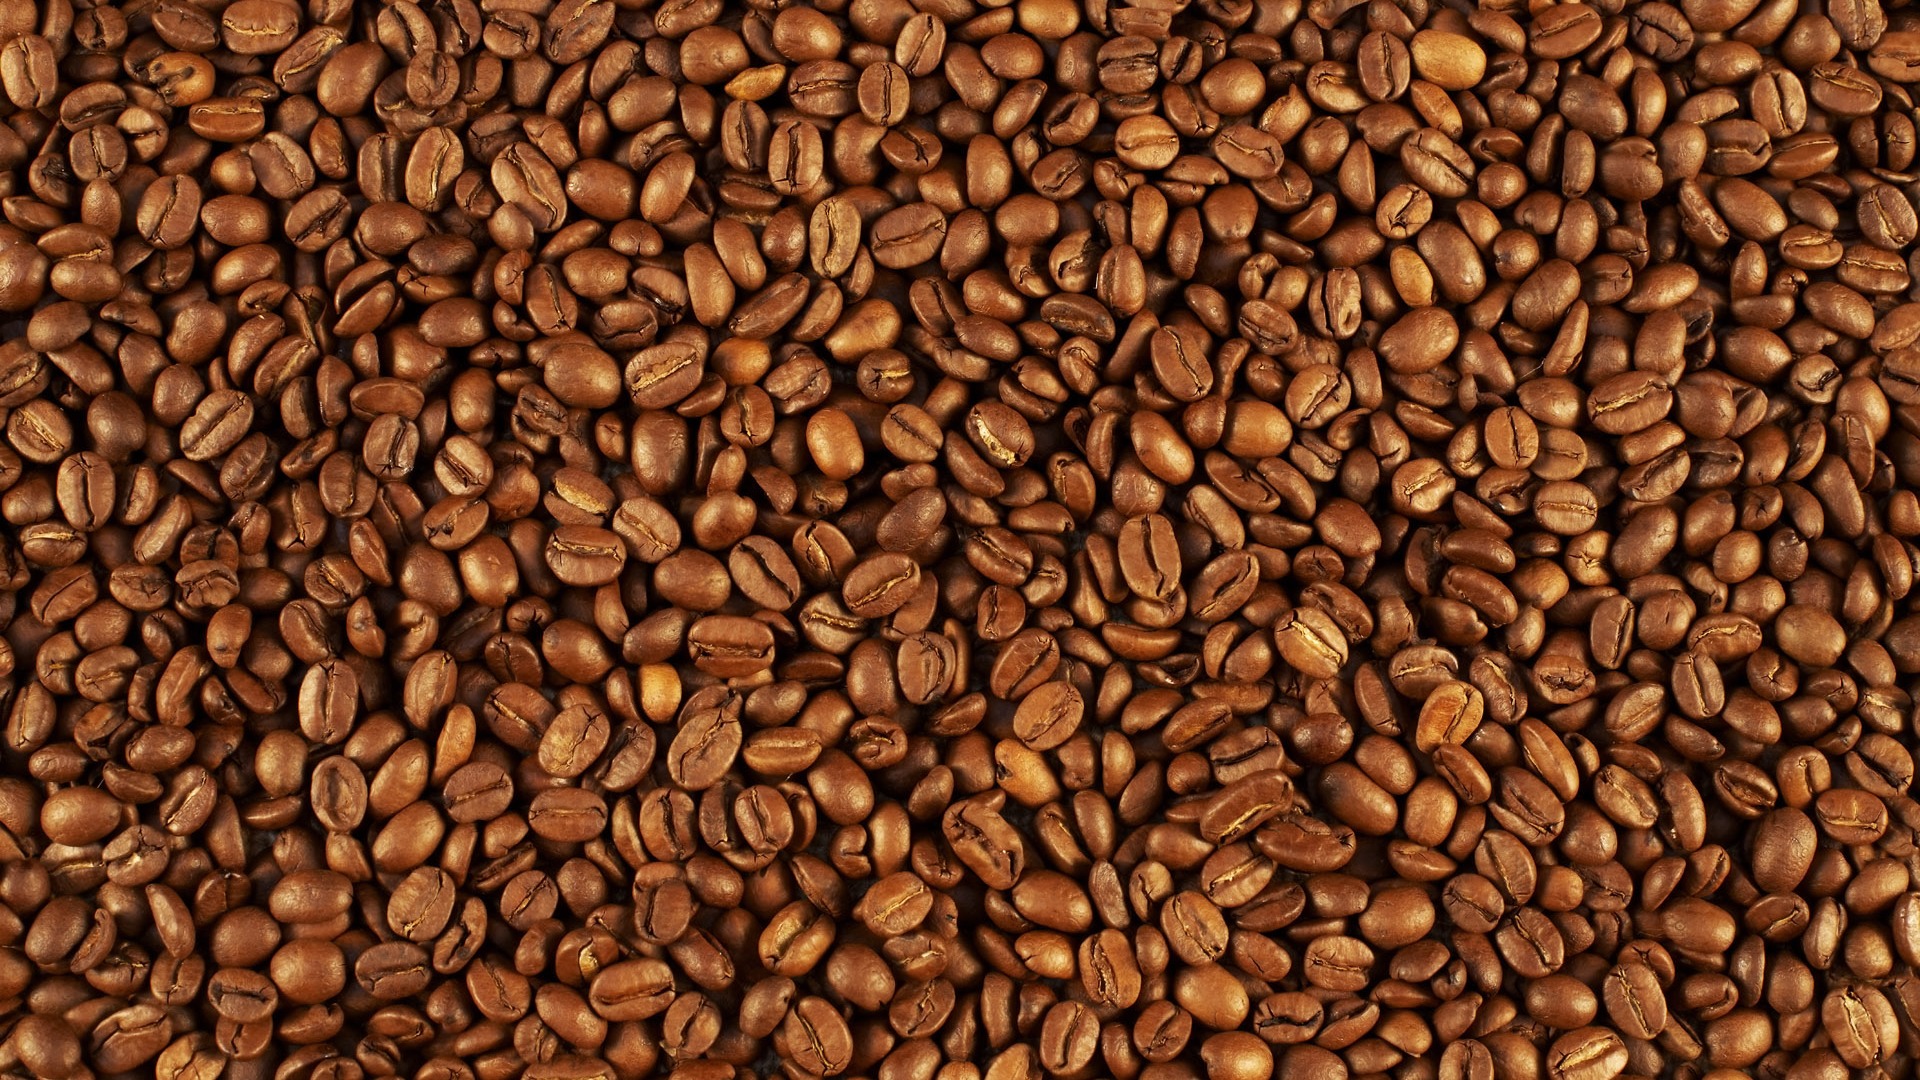 Coffee feature wallpaper (7) #16 - 1920x1080